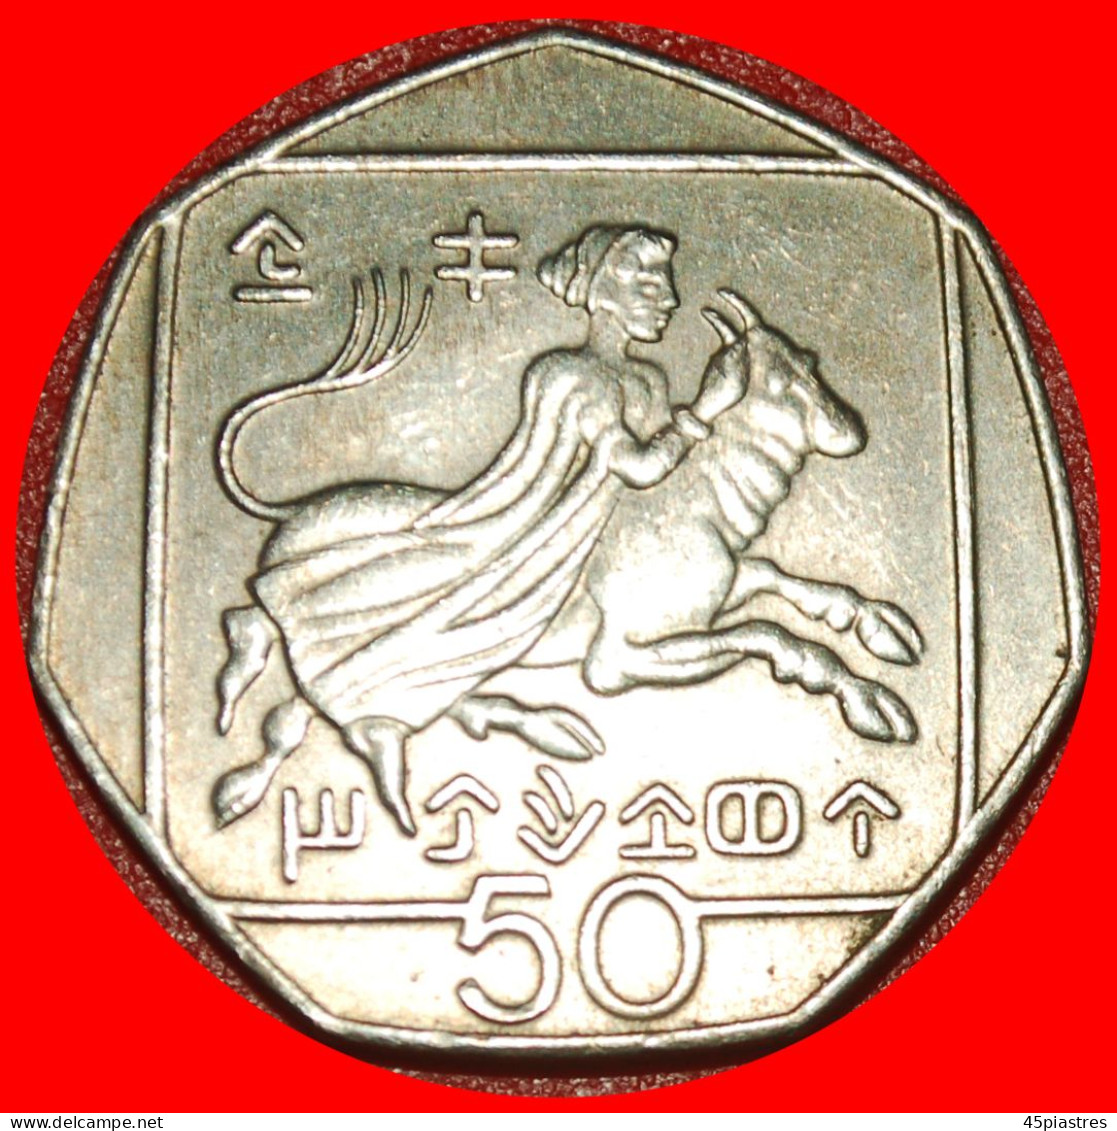 * SLOVAKIA (1991-2004): CYPRUS  50 CENTS 2002 MINT LUSTRE HEPTAGON~ABDUCTION OF EUROPA!· LOW START ·  NO RESERVE! - Cipro